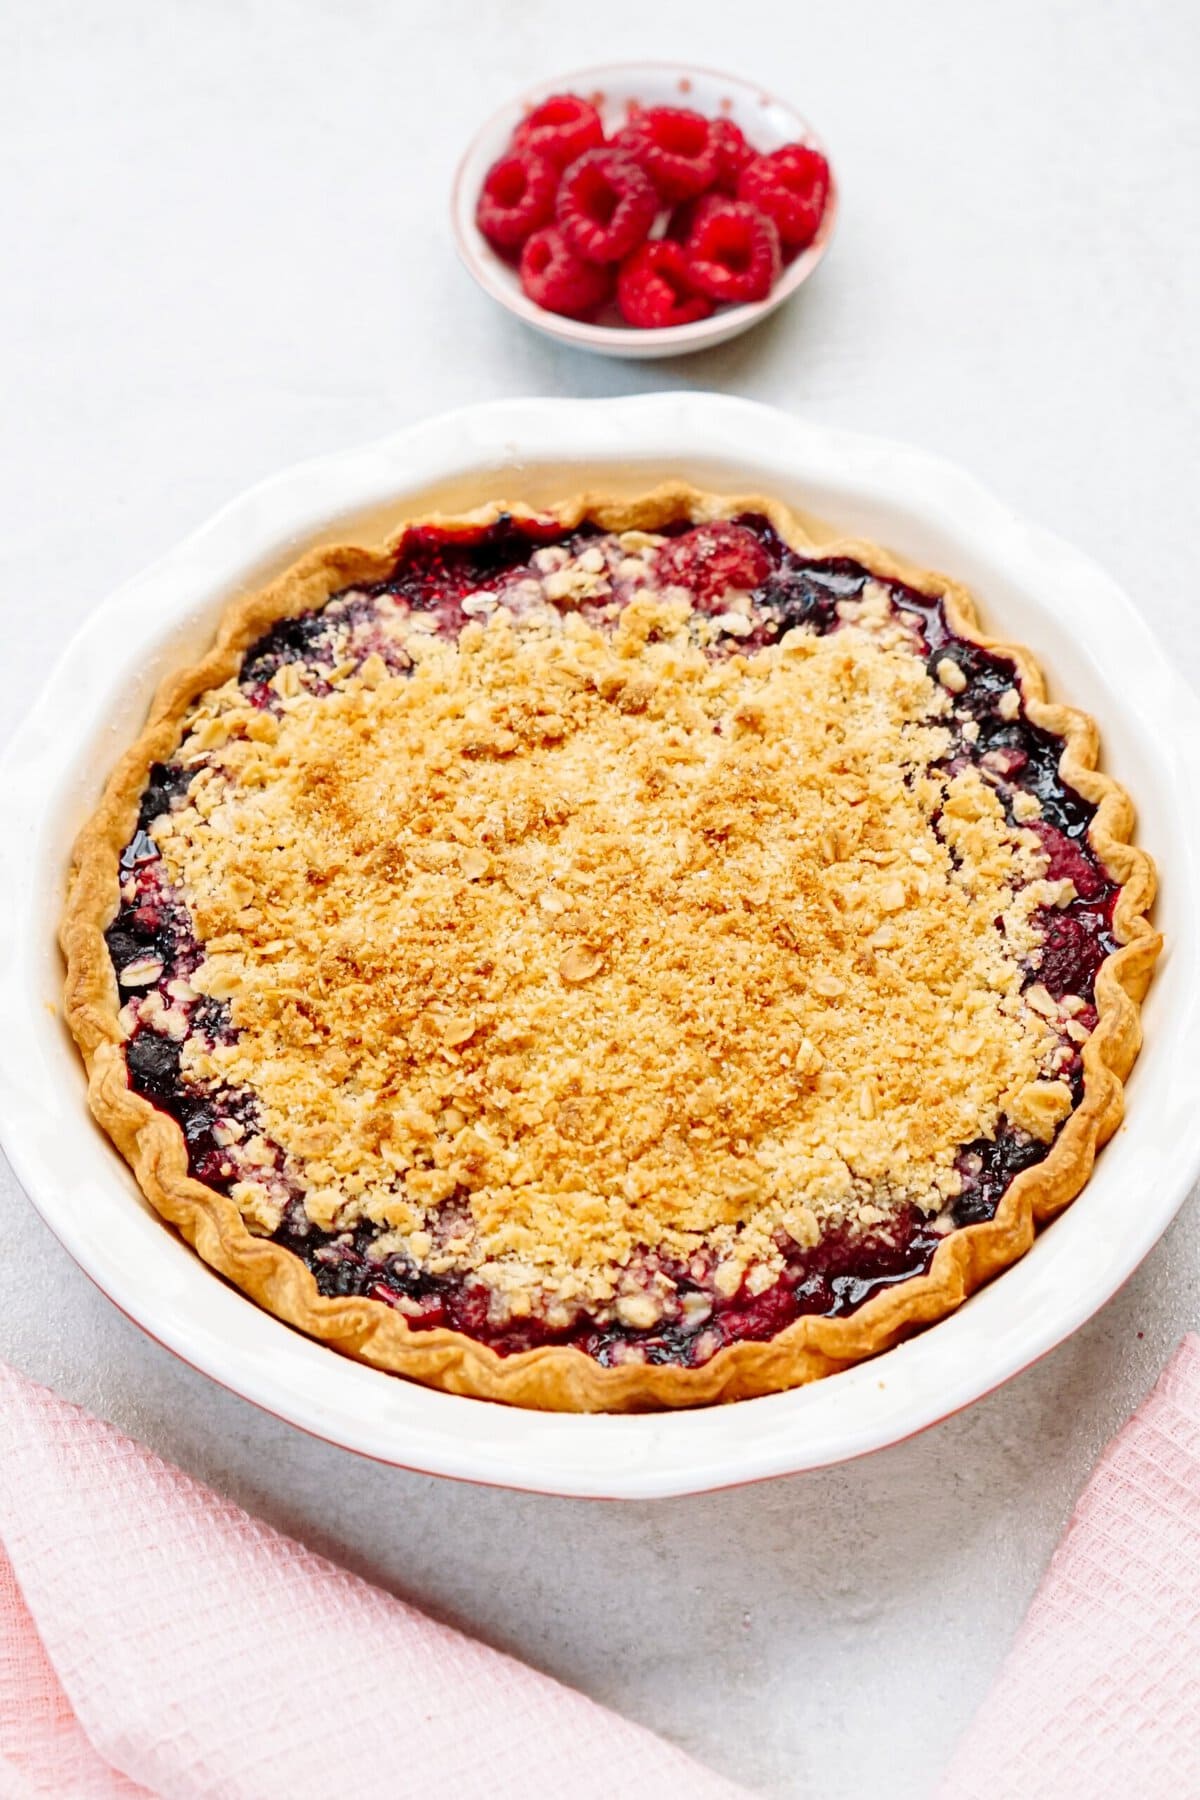 A baked mixed berry streusel pie in a white dish with a small bowl of fresh raspberries in the background.